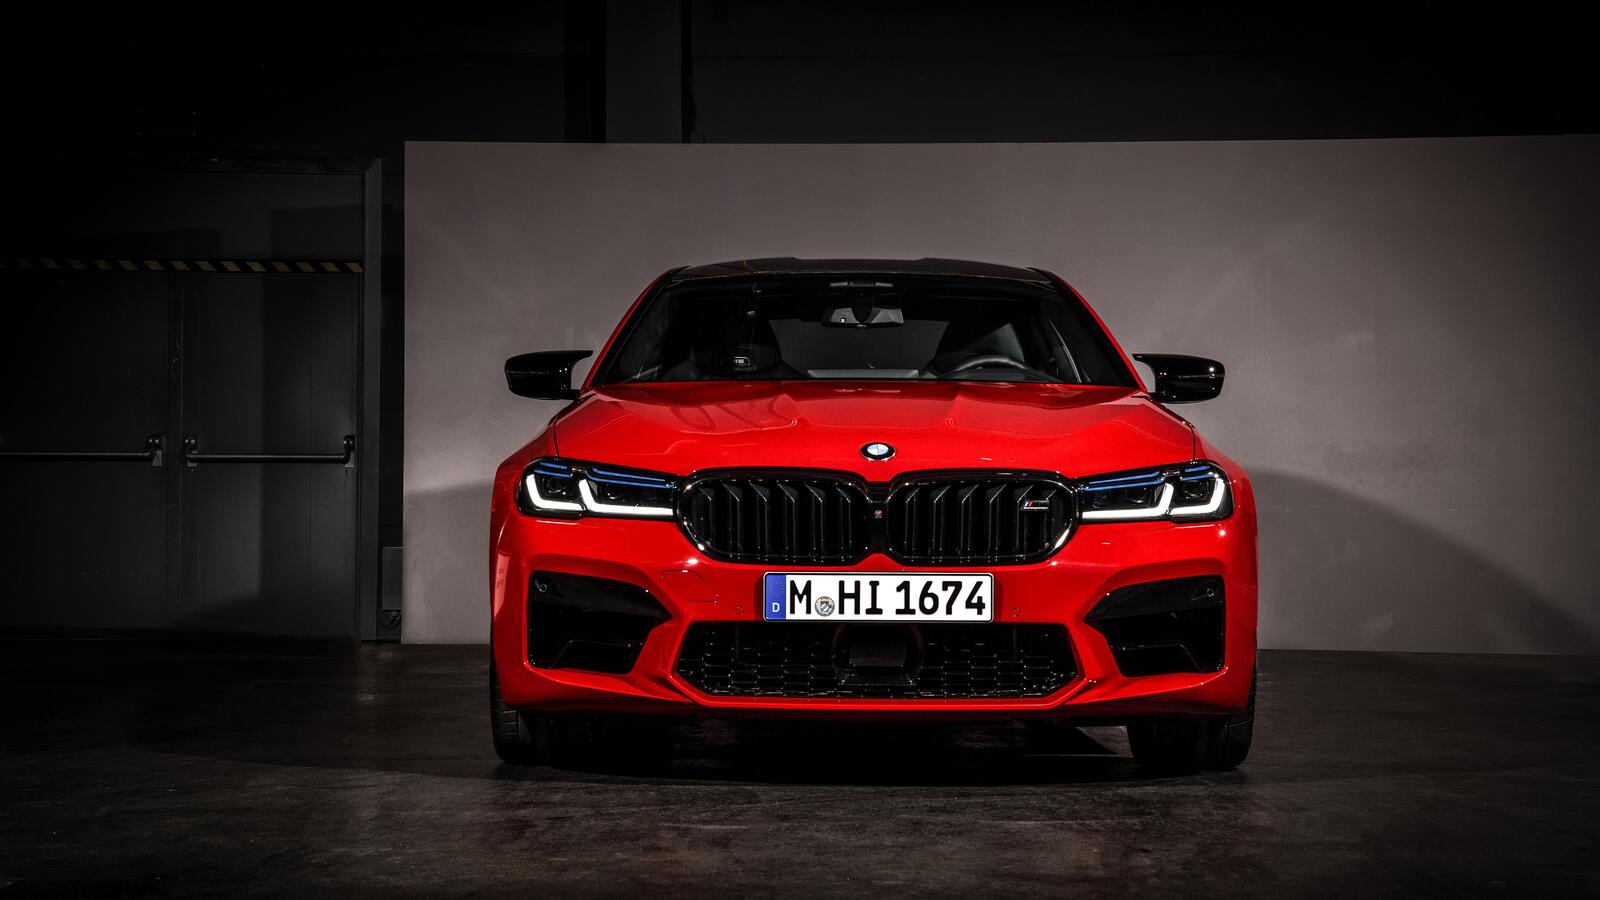 Free photo Bmw m5 in red color